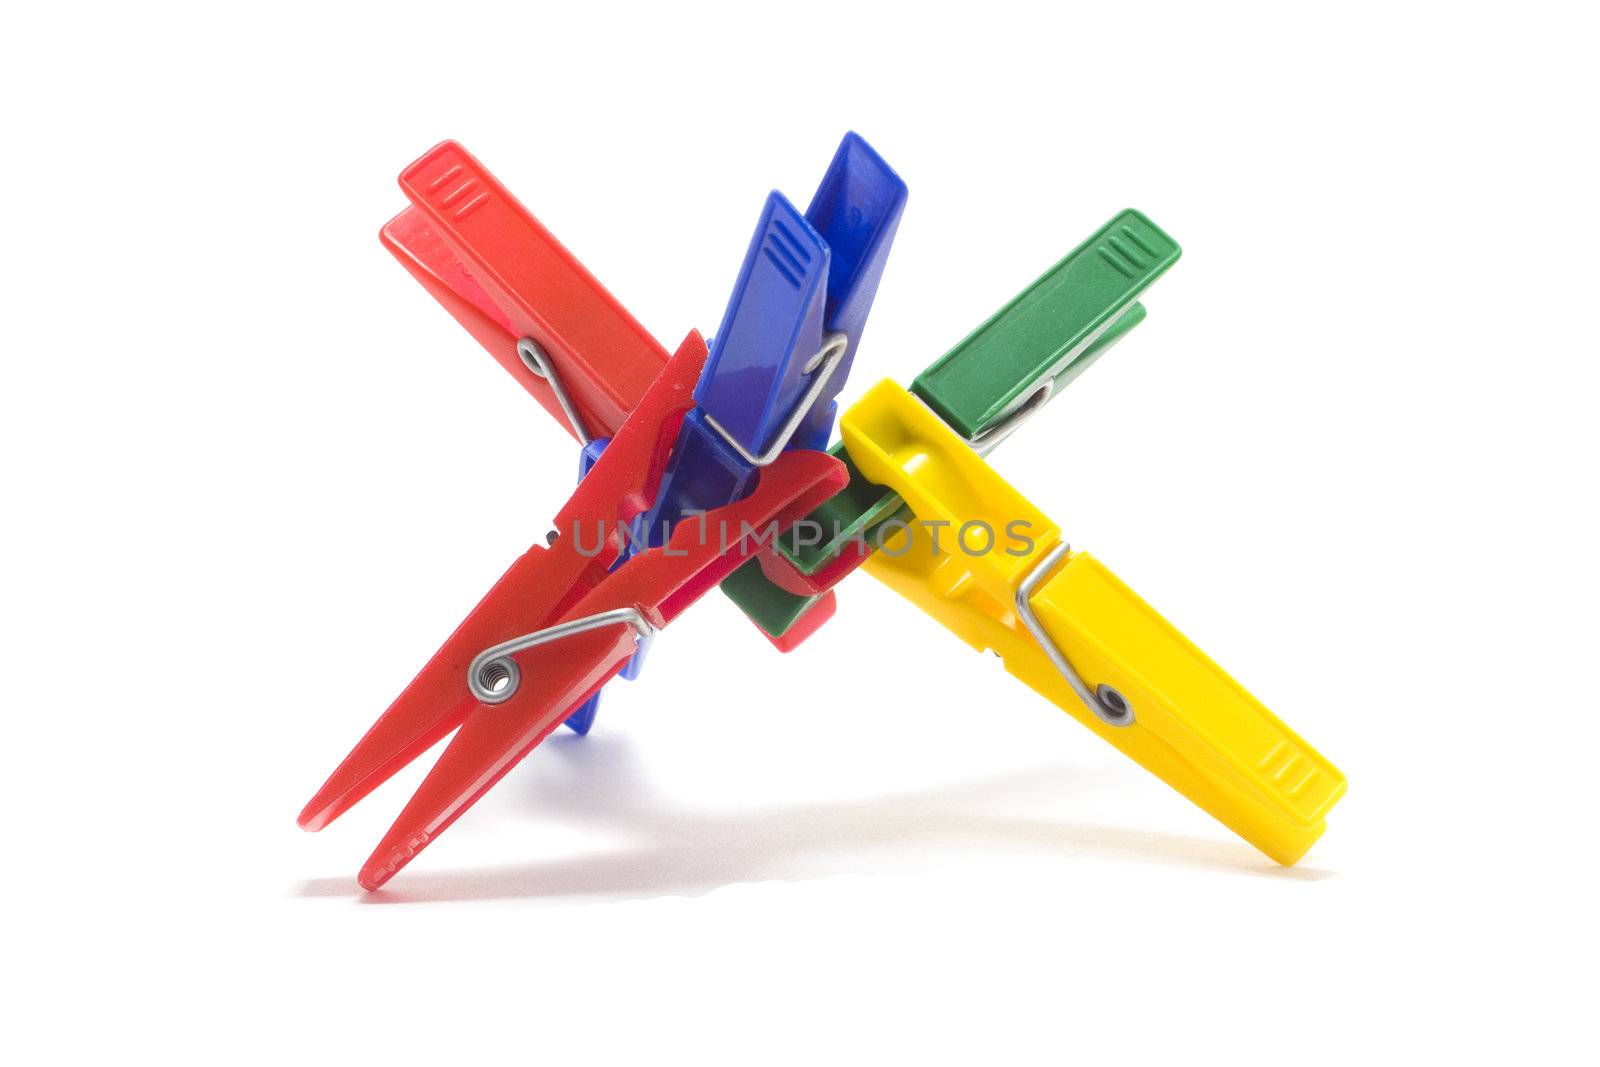 Clothes-pegs by Alekcey